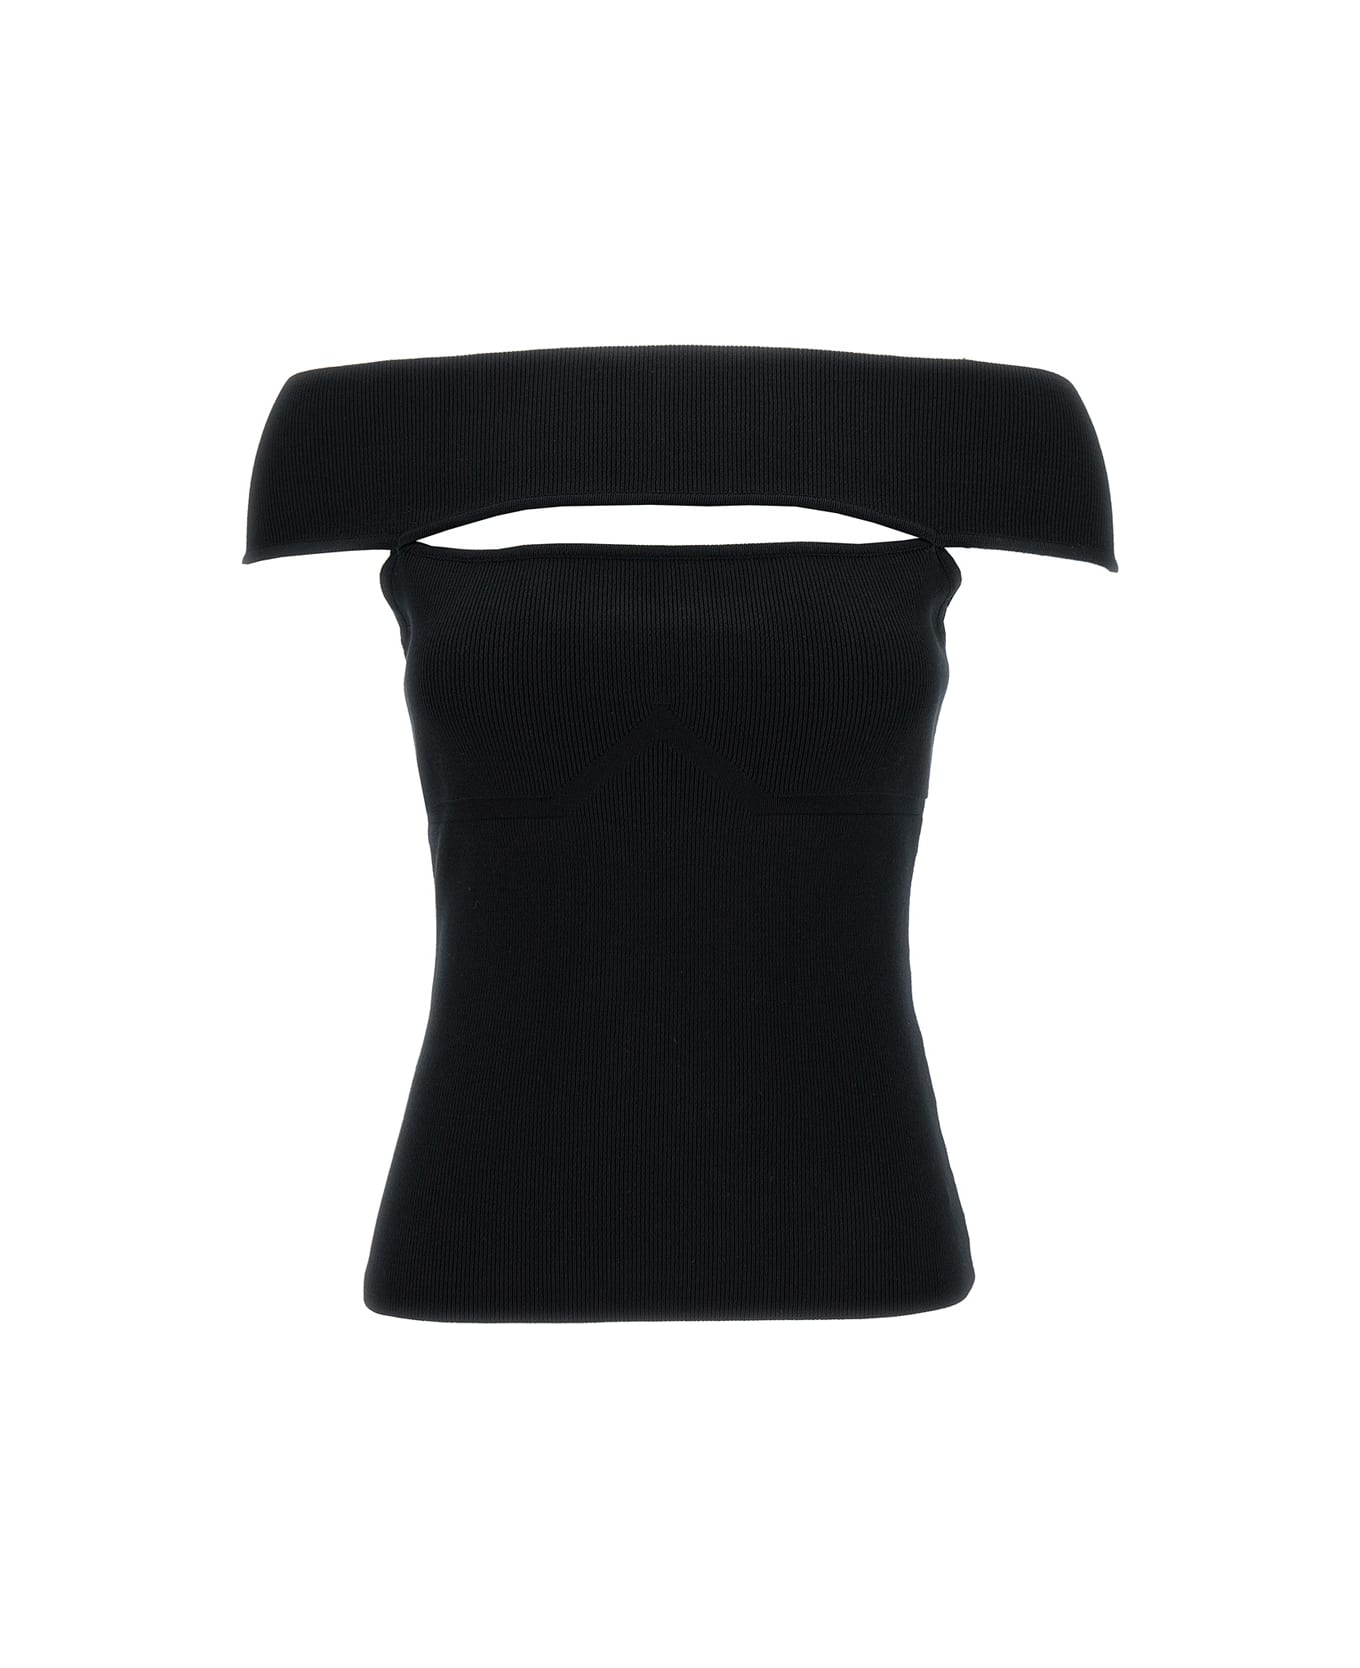 Federica Tosi Black Off-shoulder Top With Cut-out In Ribbed Viscose Blend Woman - Black トップス